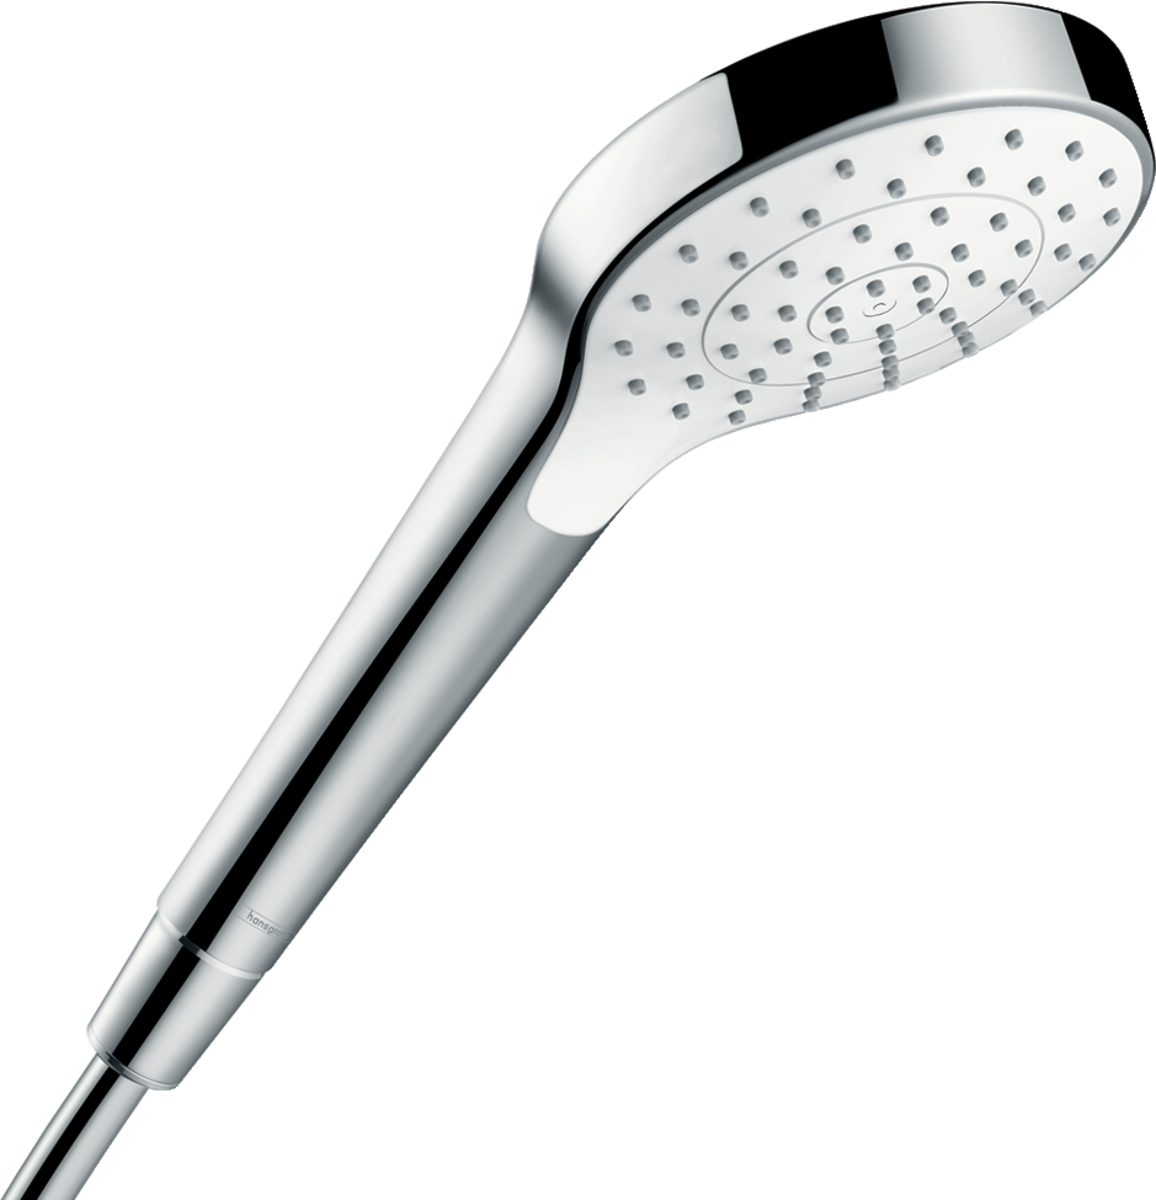 Picture of HANSGROHE Croma S Hand shower 110 1jet EcoSmart #26805400 - White/Chrome